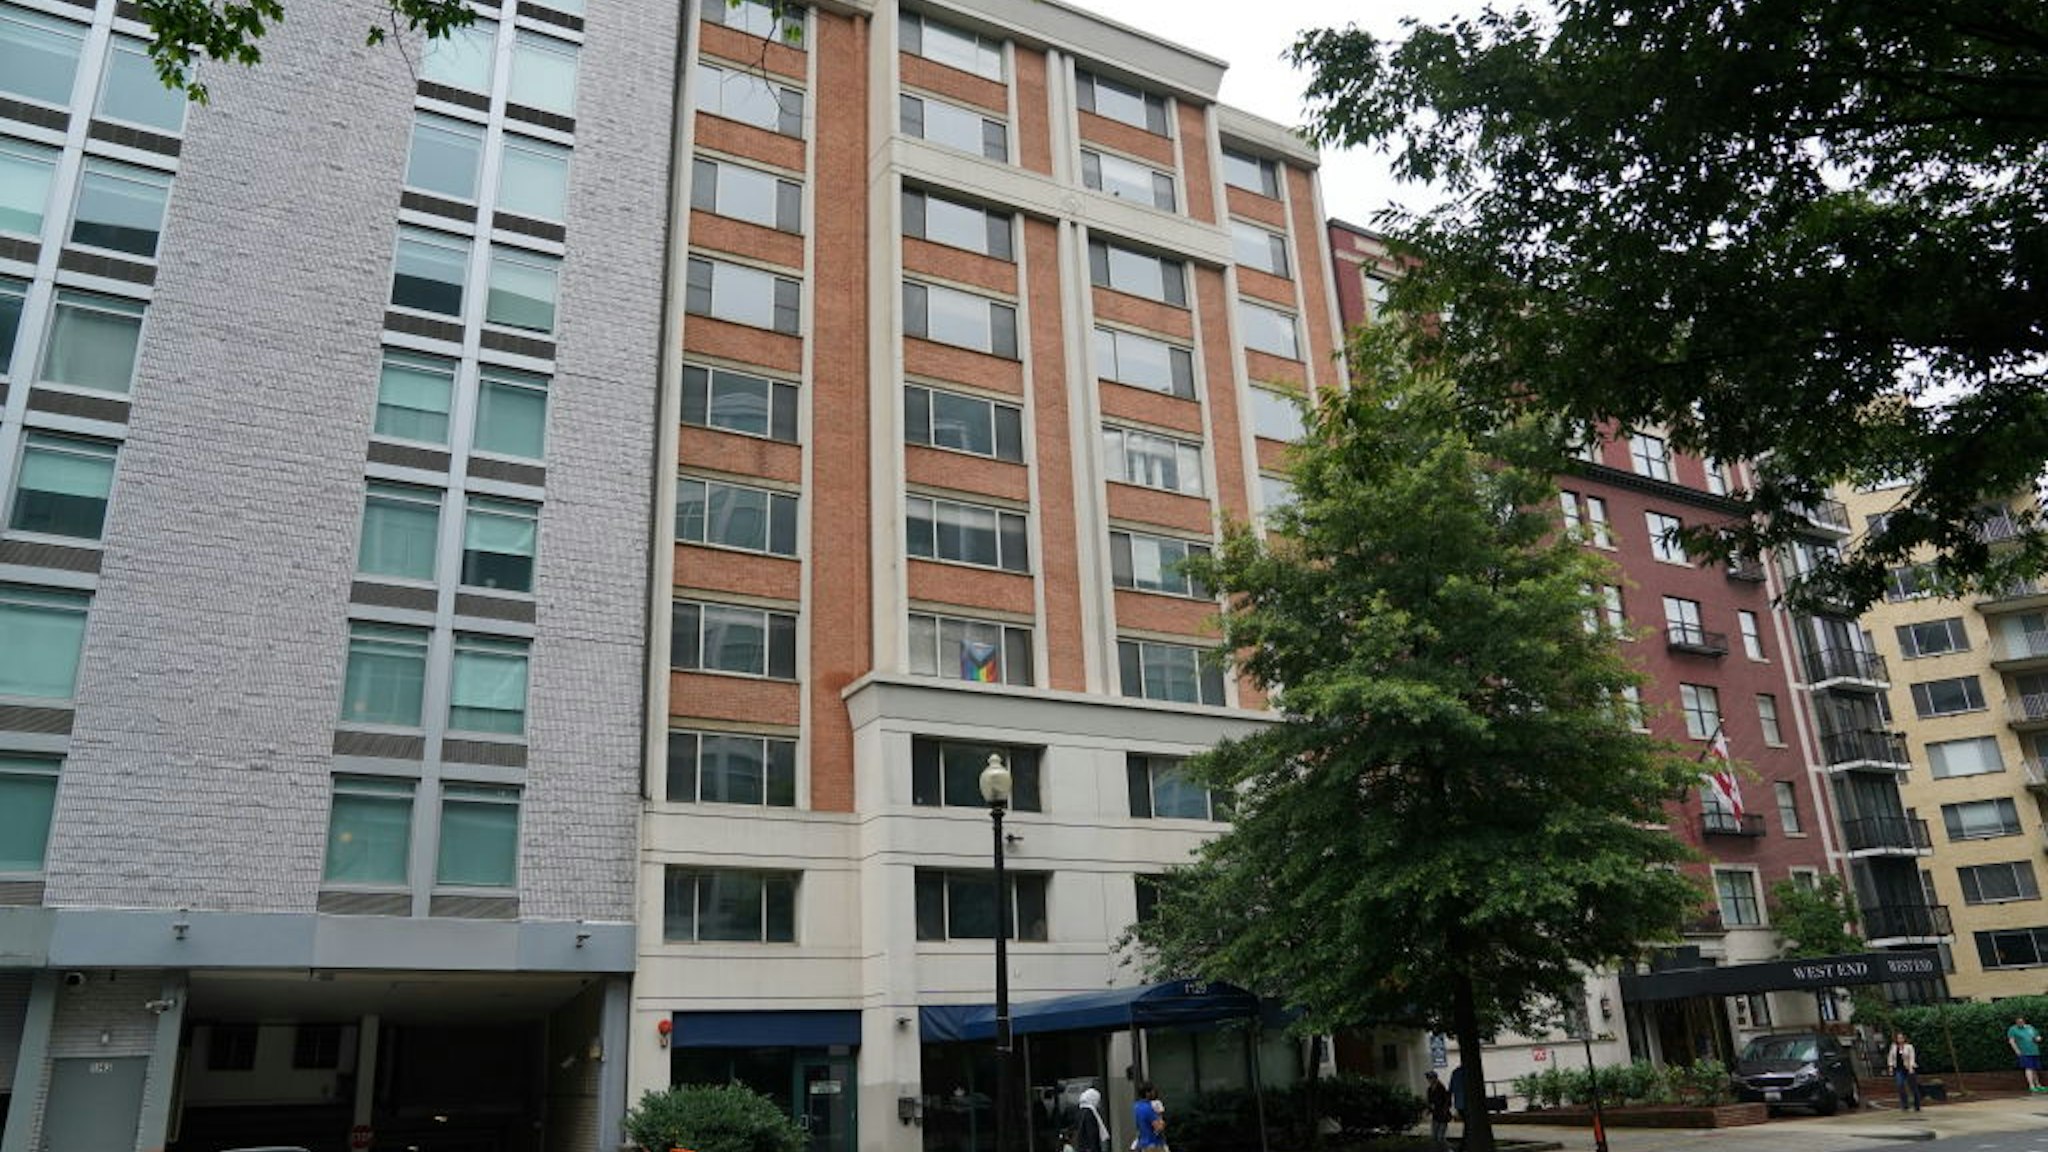 WASHINGTON, DC - JUNE 23: The George Washington University residence hall at 1129 New Hampshire Ave on June 23, 2023 in Washington, D.C. The residence hall has plans to be converted into a homeless shelter. (Photo by Minh Connors/The Washington Post via Getty Images)